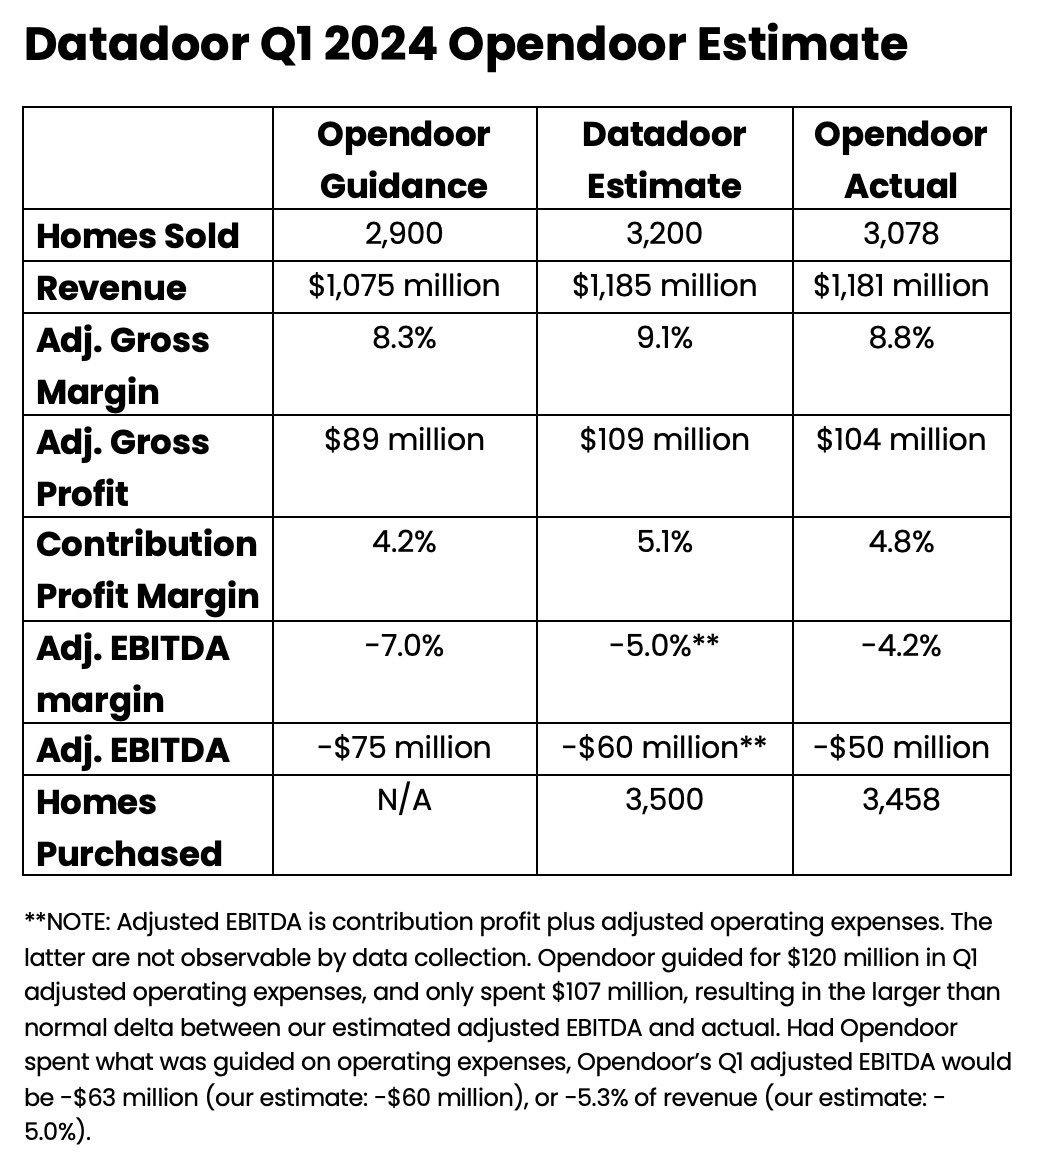 Here's how our estimates of Opendoor's Q1 2024 result compared to actual...

$OPEN